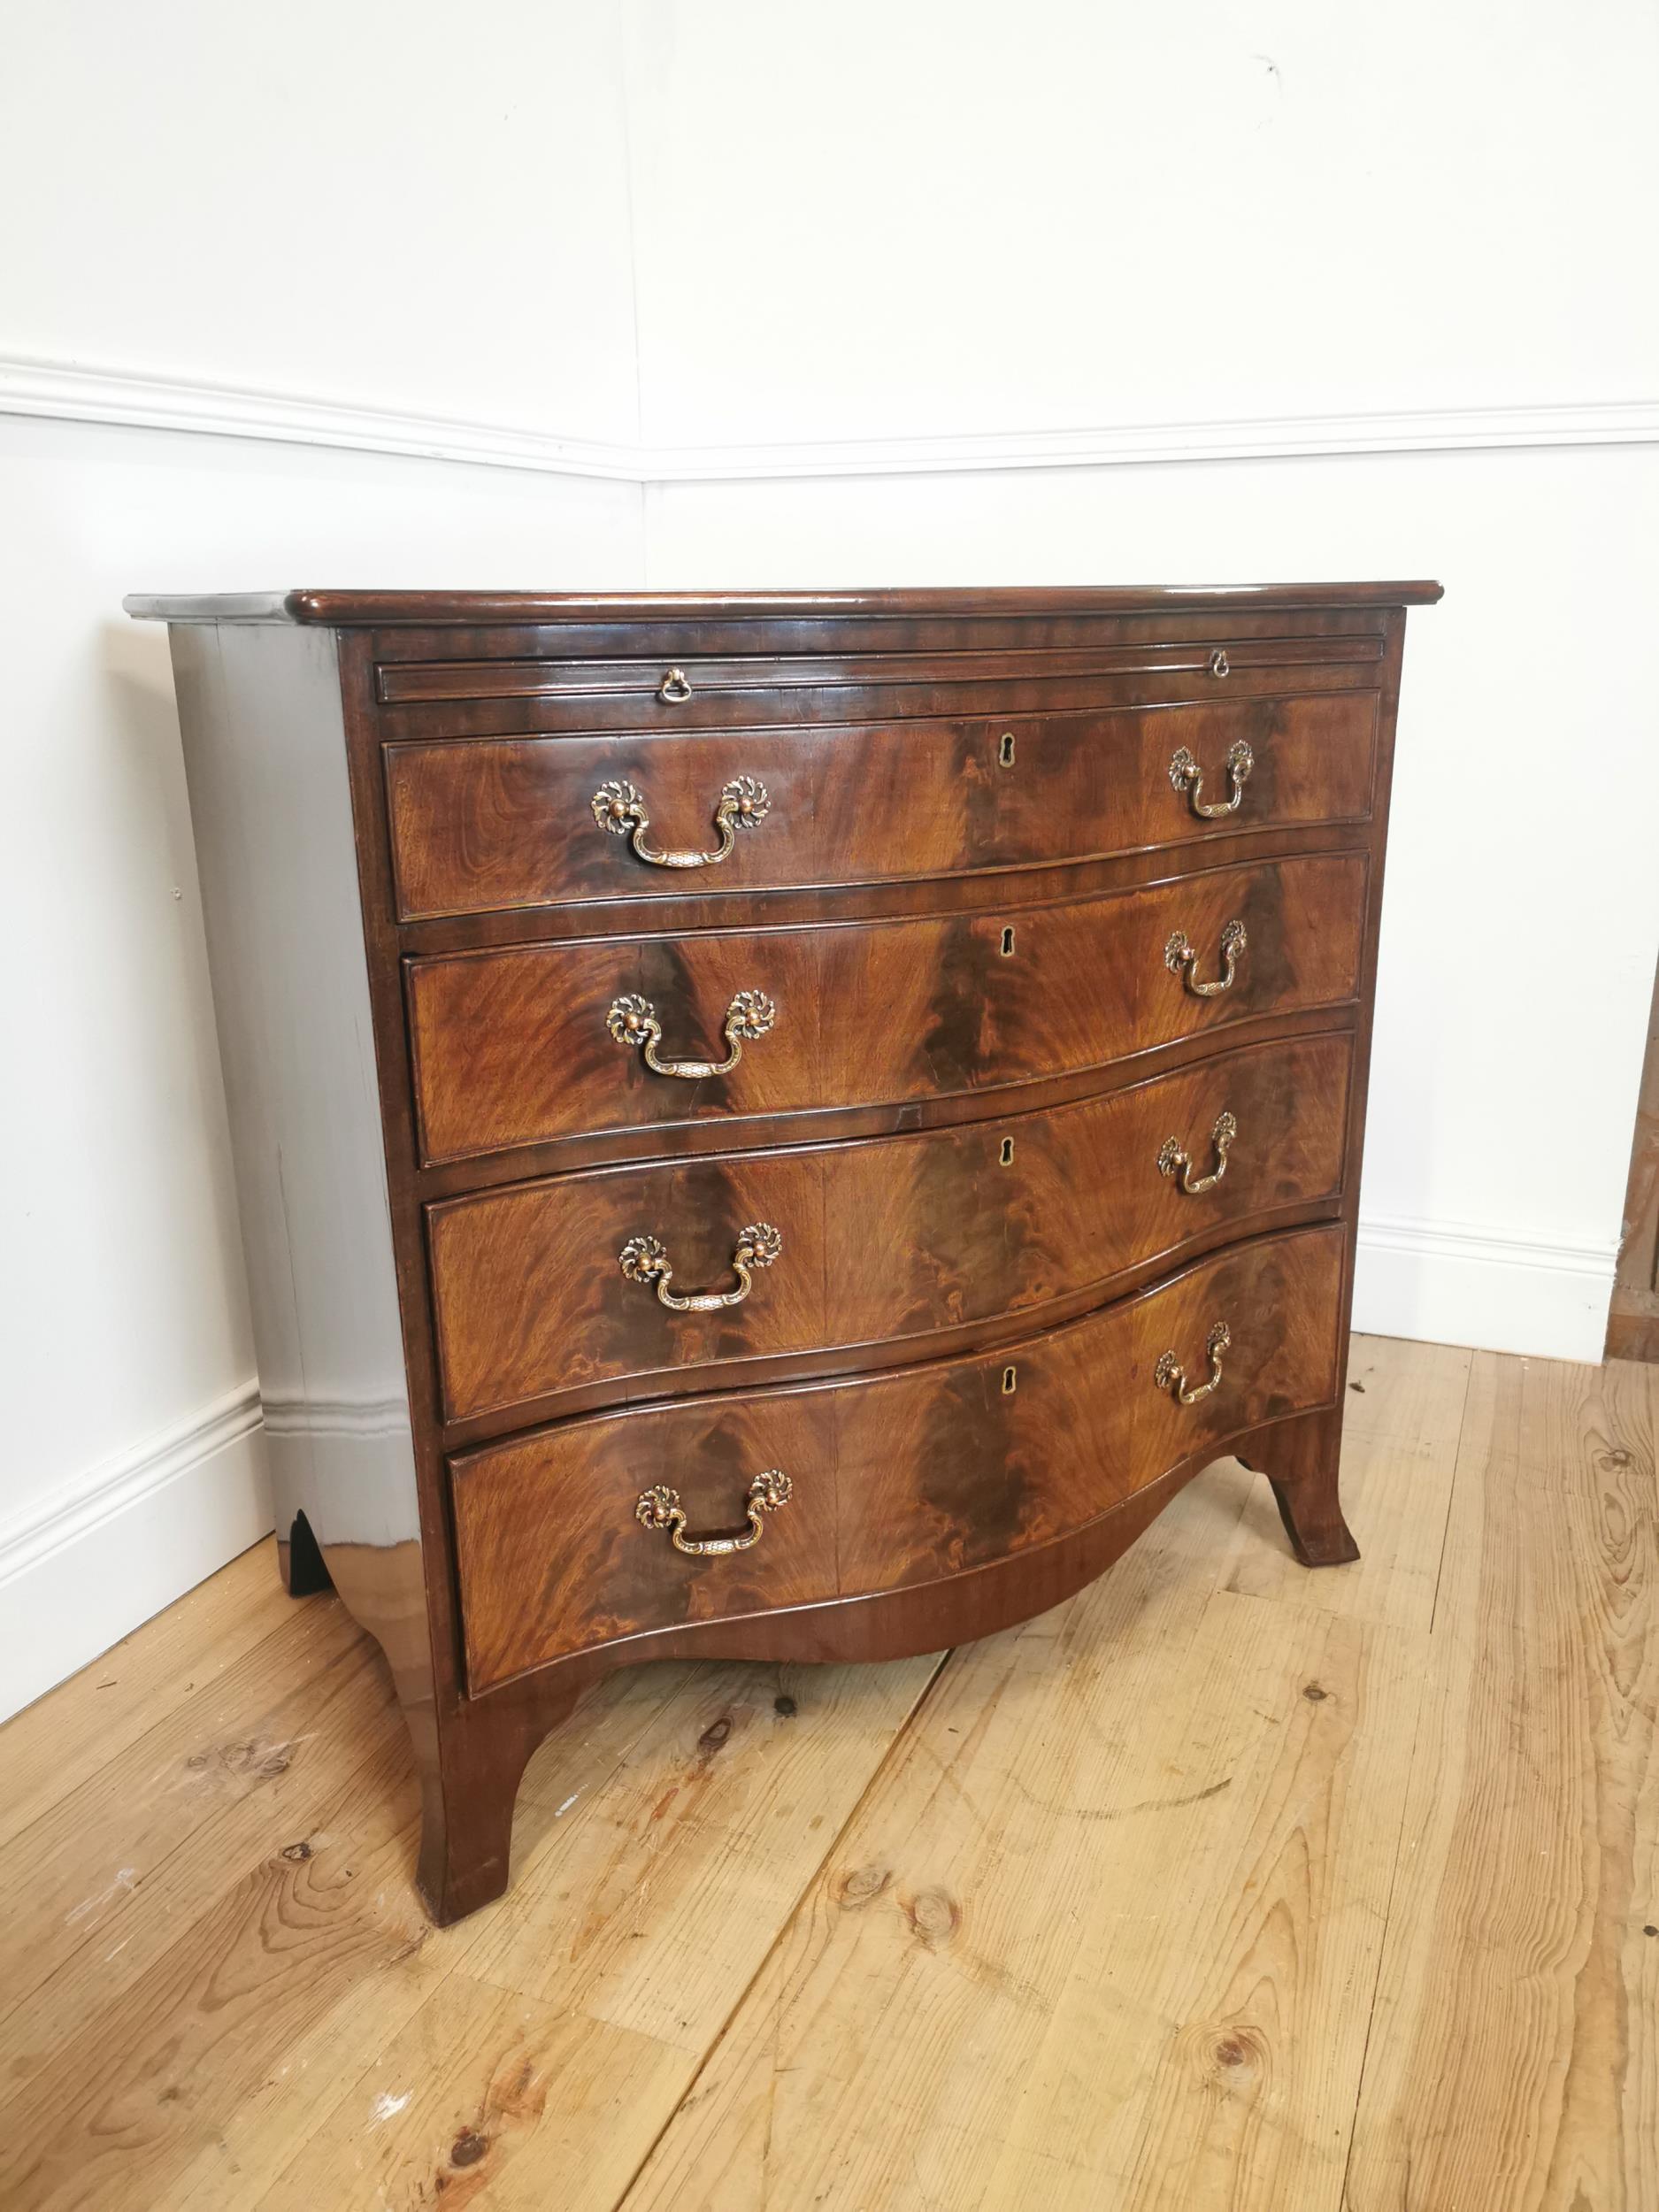 Good quality Edwardian serpentine fronted chest of drawers with four graduated drawers with brushing - Image 2 of 6